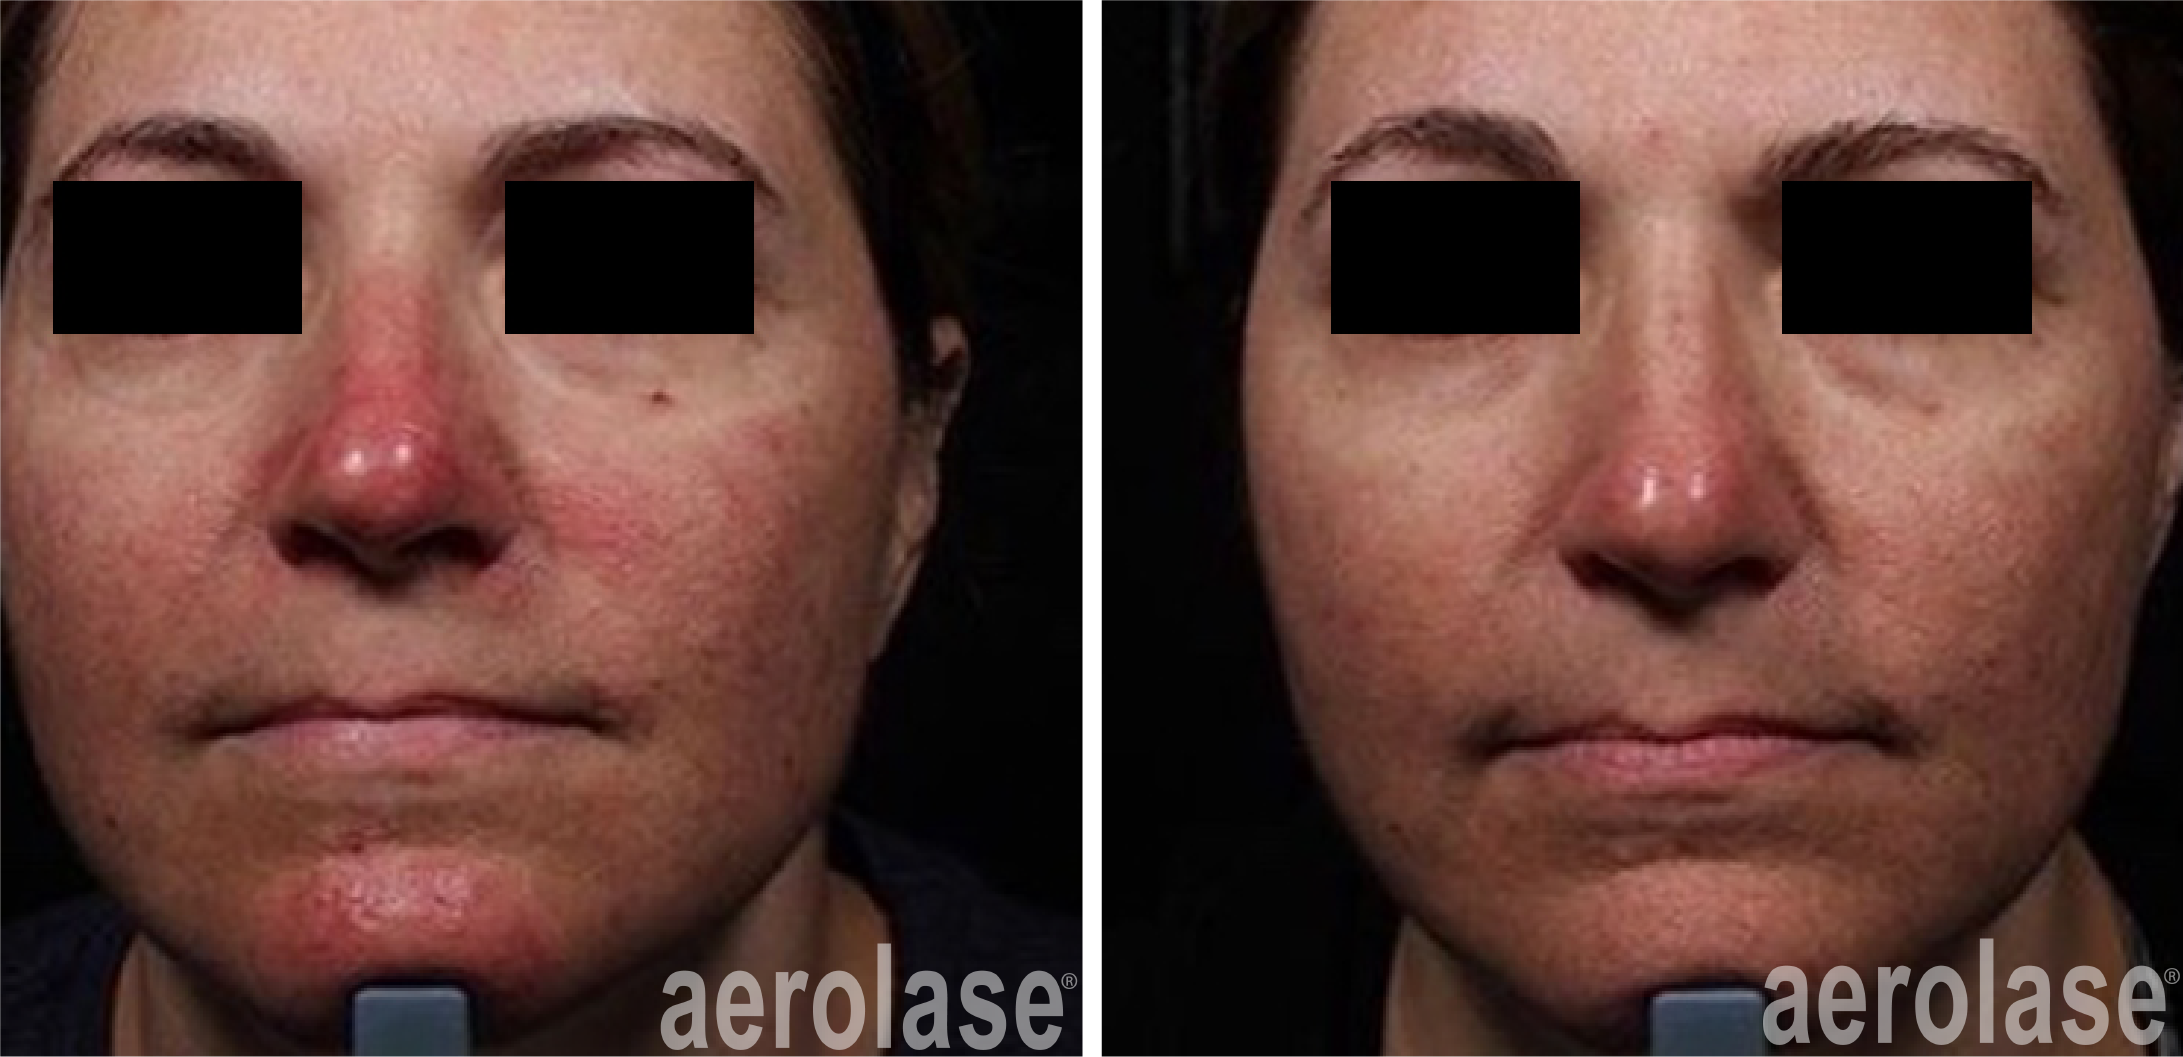 aerolase-neoskin-rosacea-1-week-after-1-treatment-one-aesthetics.png